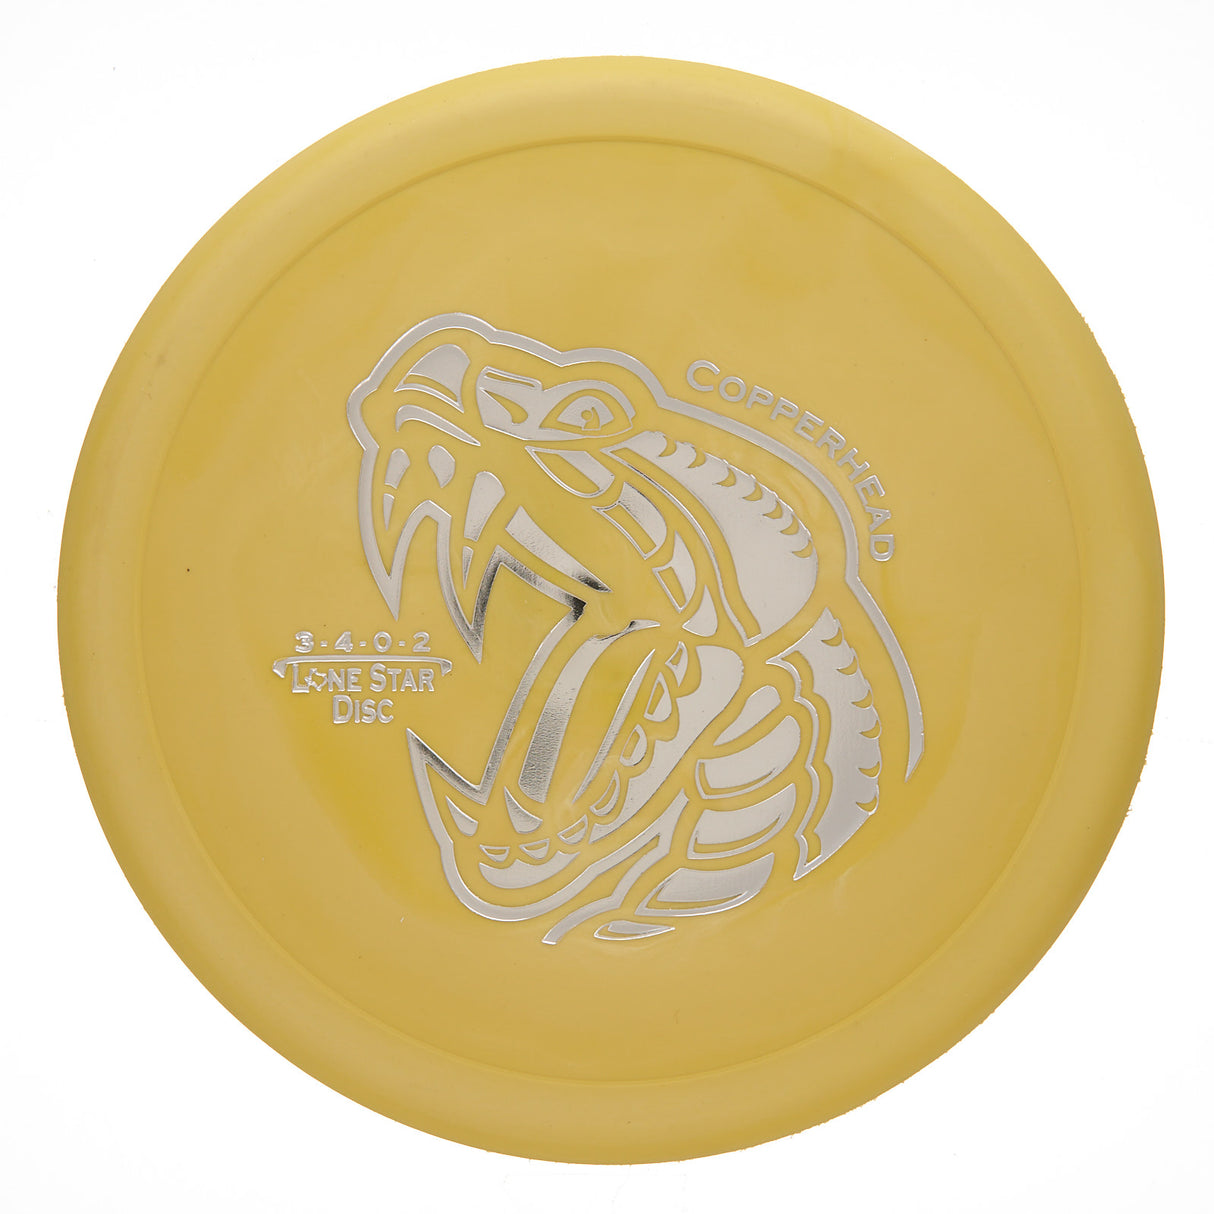 Lone Star Disc Copperhead - Artist Series Victor 2 174g | Style 0001